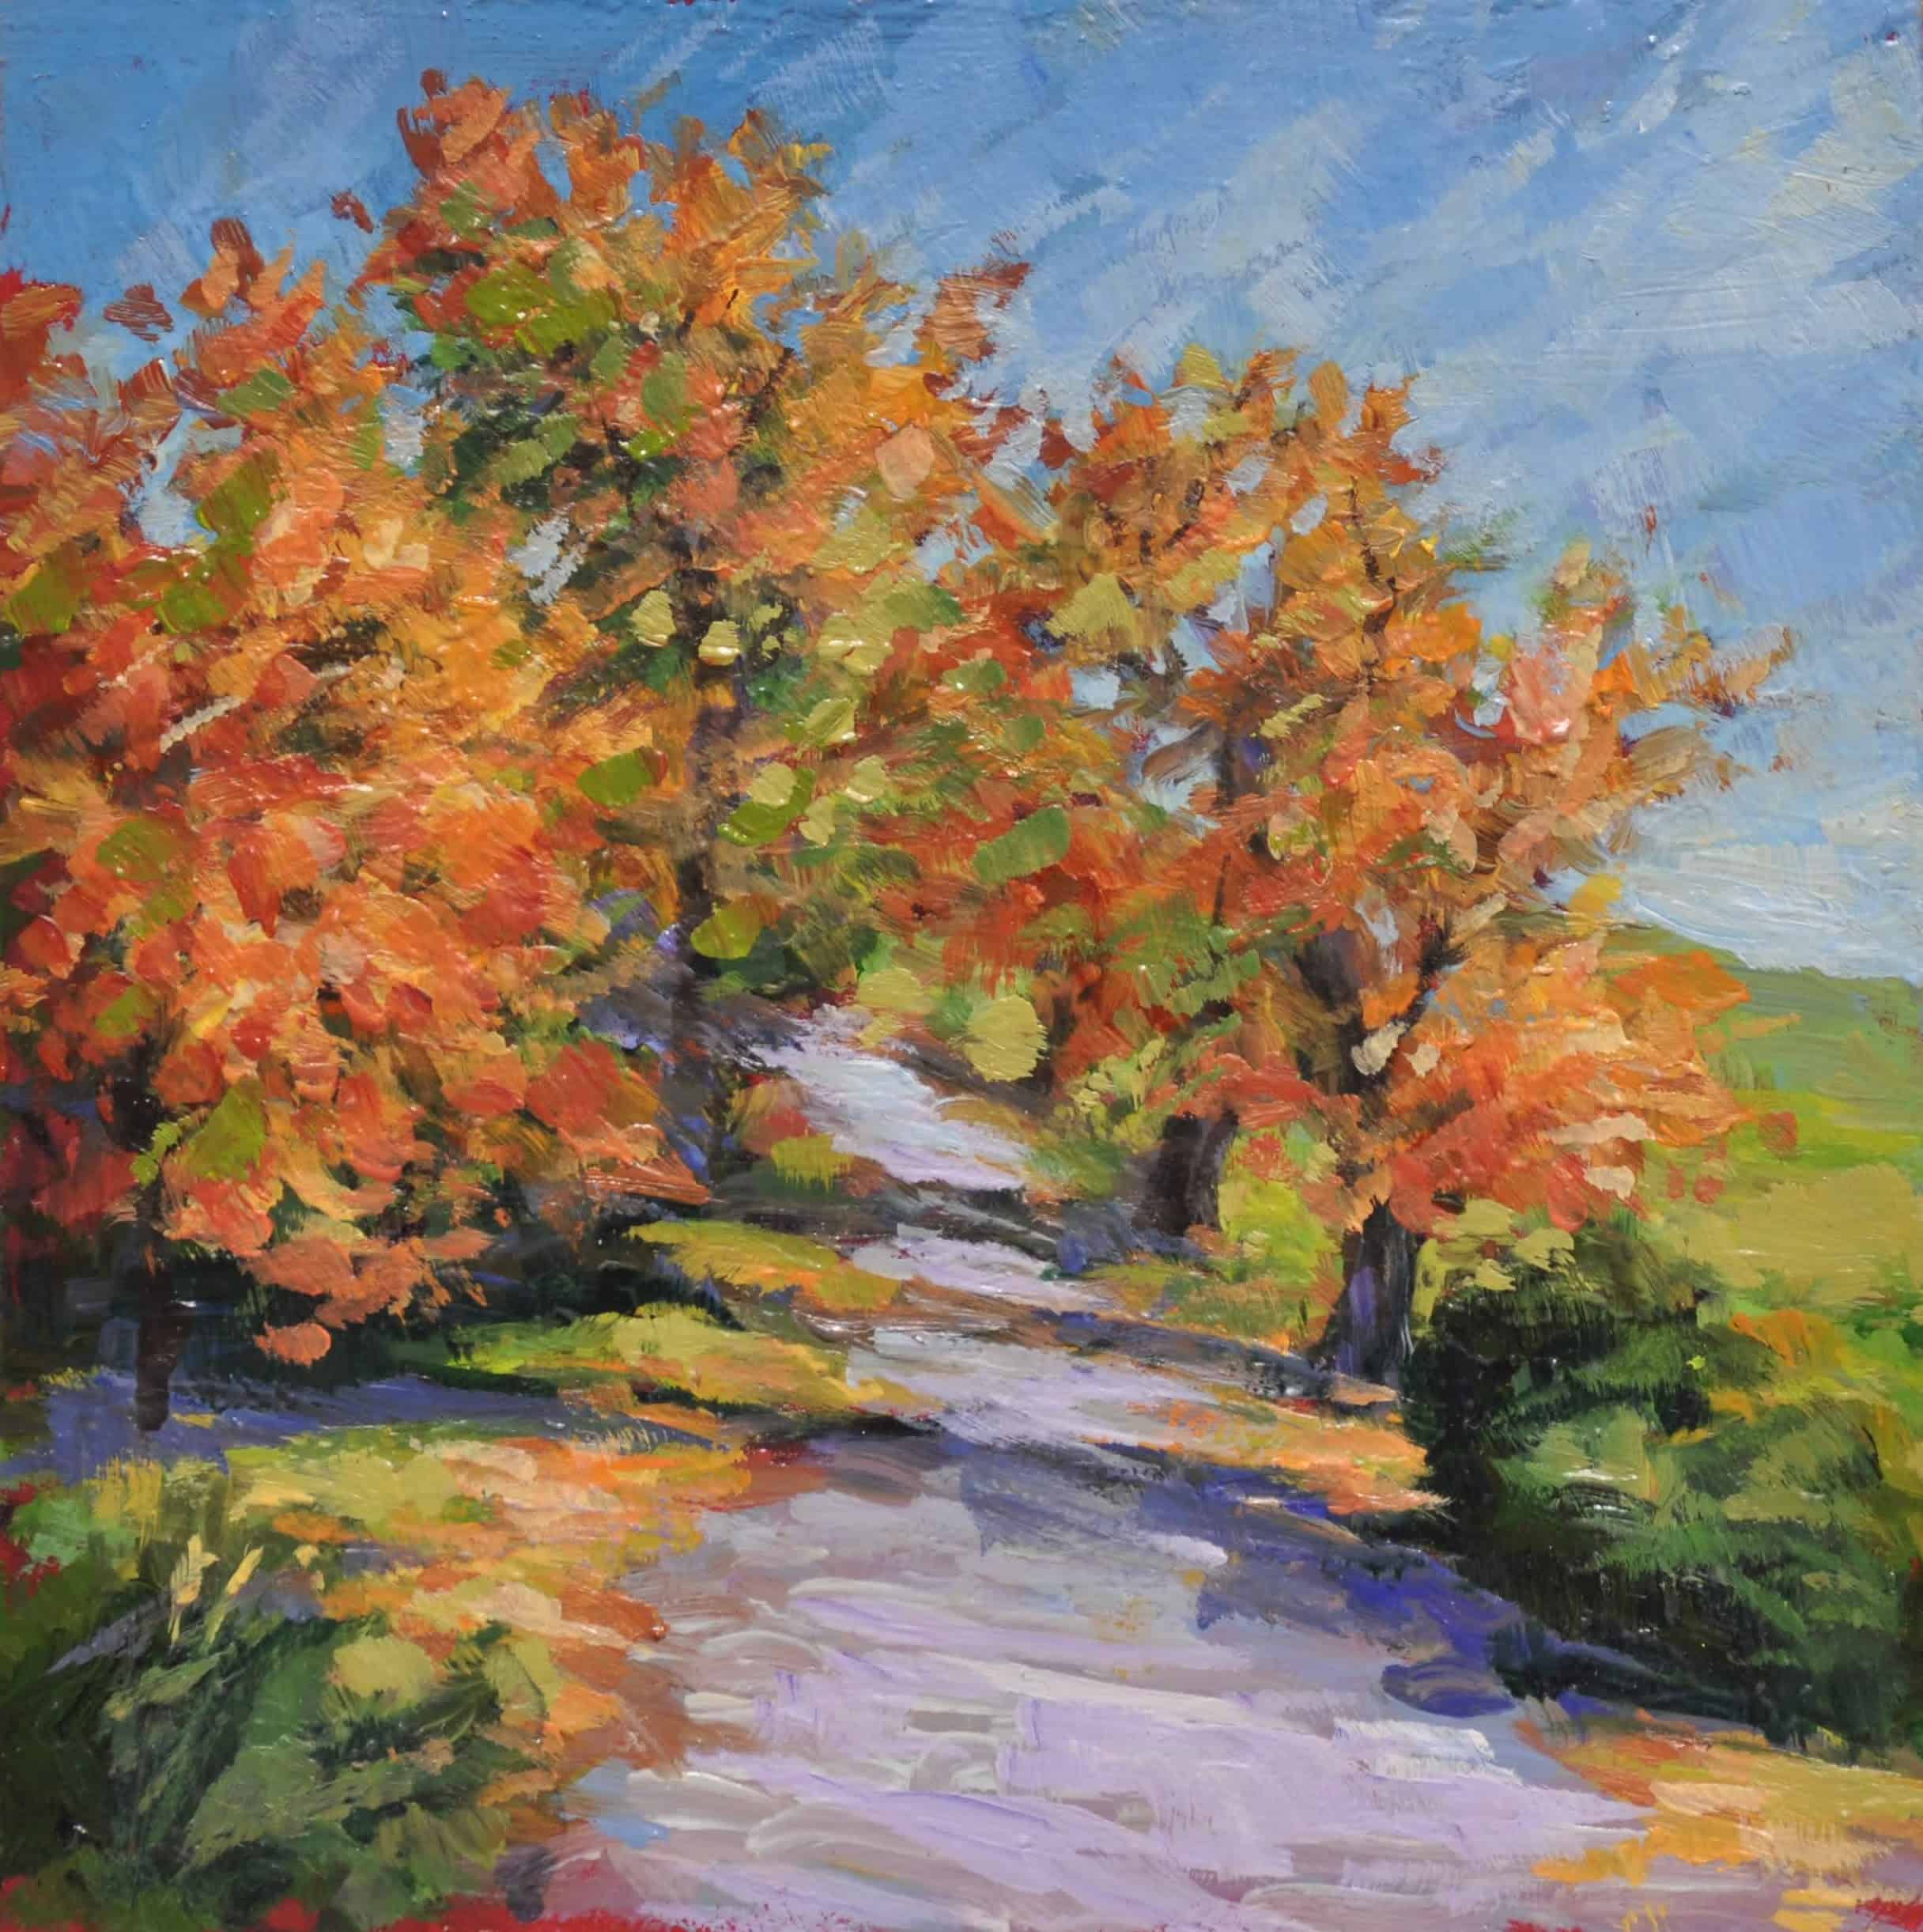 Kim Aerts oil painting - Horse Track in Autumn - 4x4 inches